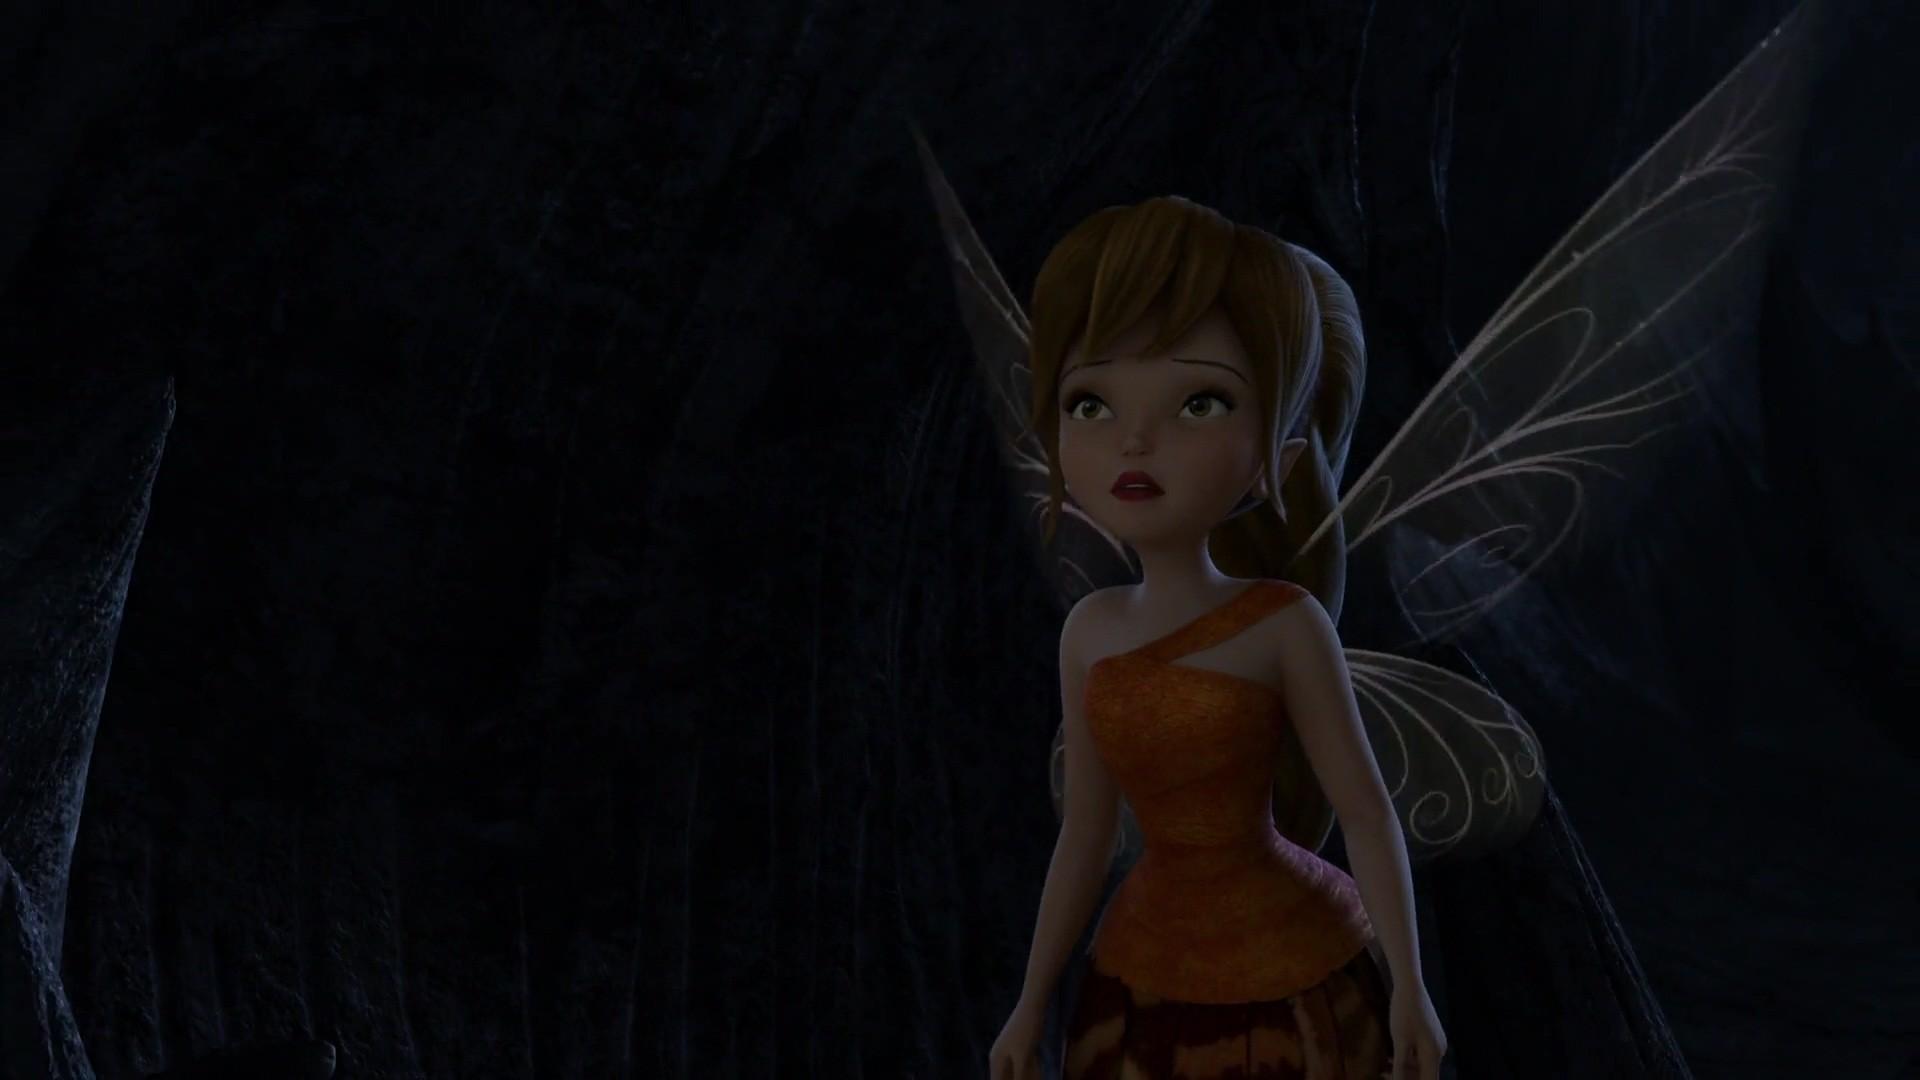 HD wallpaper, Movies, Tinkerbell, Animated Movies